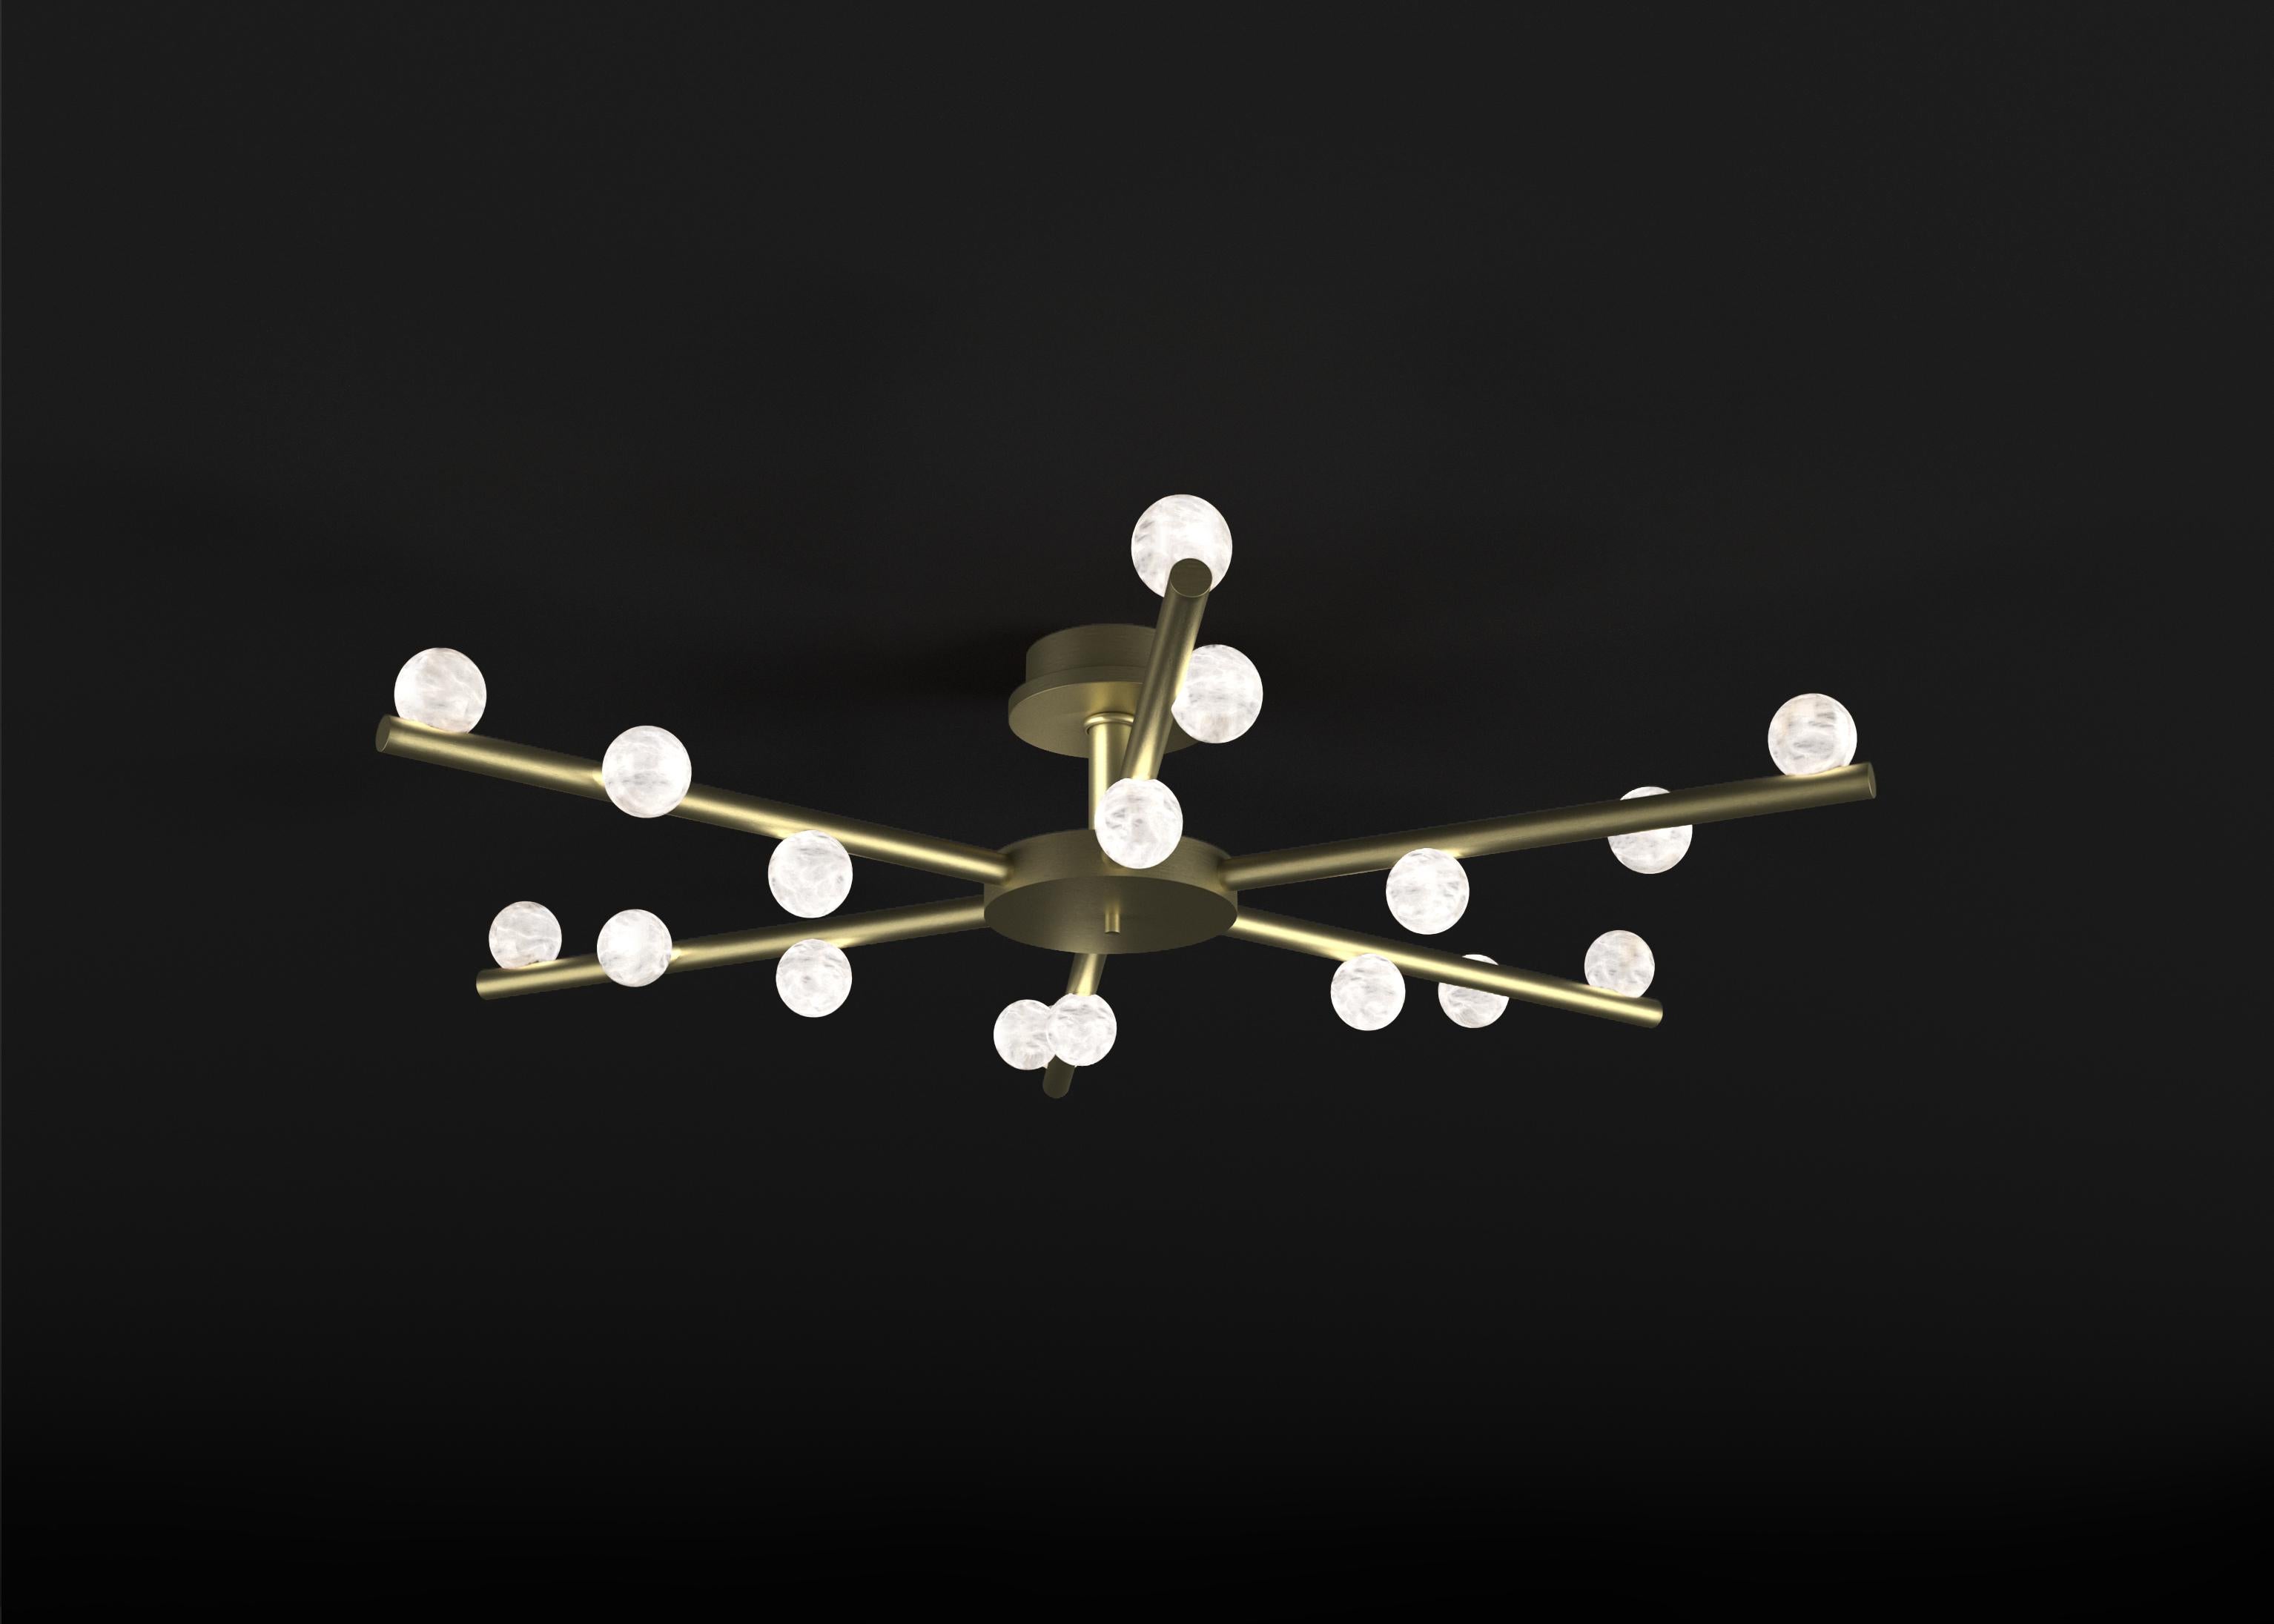 Demetra Brushed Brass Ceiling Lamp by Alabastro Italiano
Dimensions: D 85 x W 97 x H 22 cm.
Materials: White alabaster and brushed brass.

Available in different finishes: Shiny Silver, Bronze, Brushed Brass, Ruggine of Florence, Brushed Burnished,